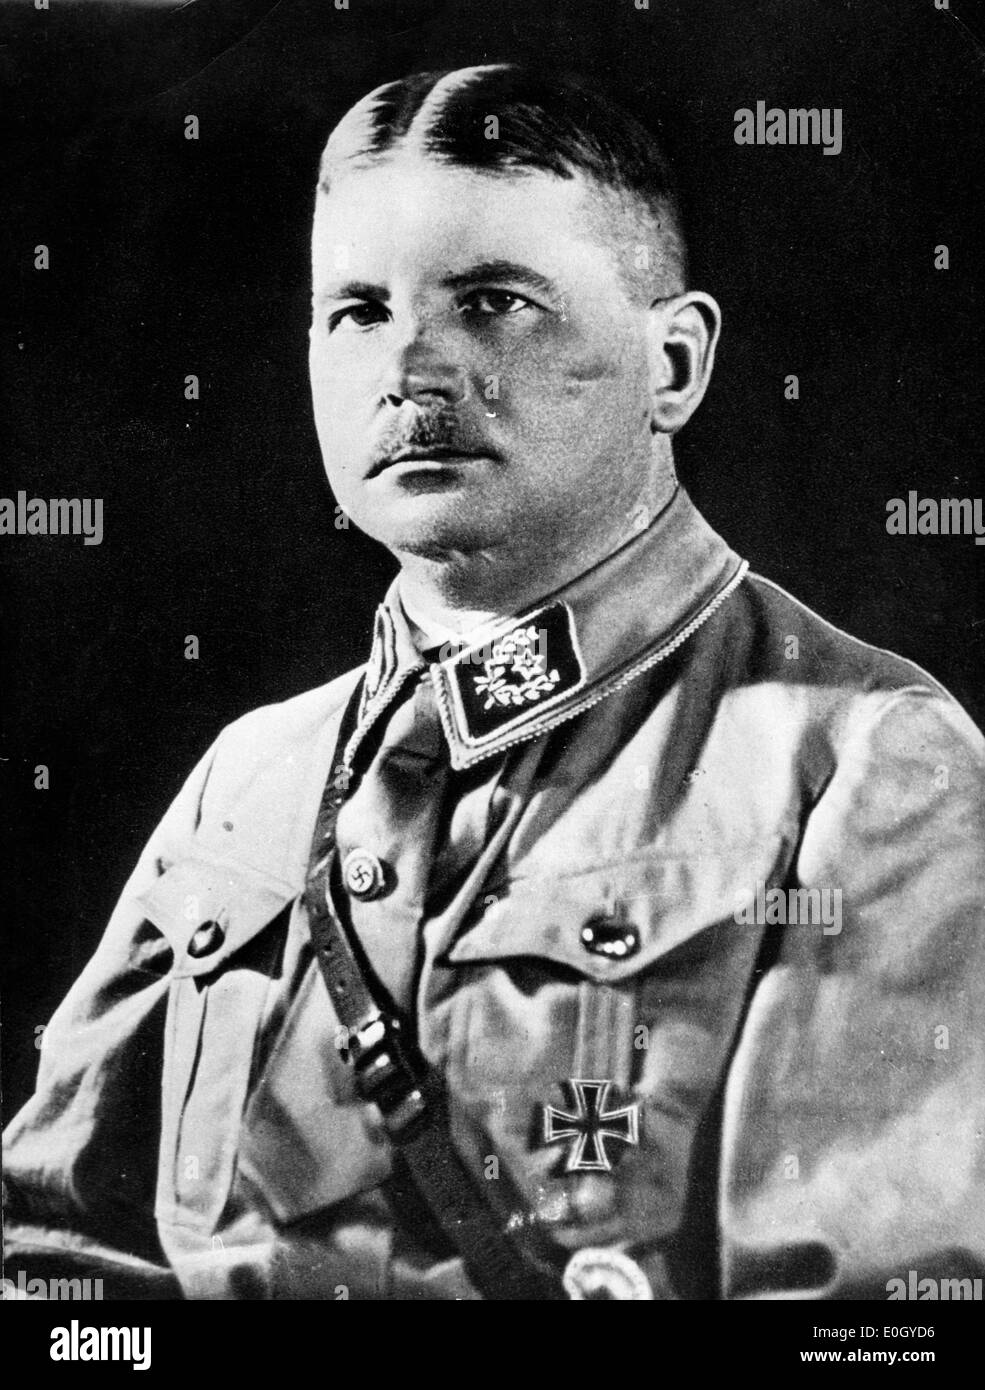 Jan. 01, 1940 - Germany - File Photo: circa 1940s, exact location unknown. Portrait of Nazi leader ERNST ROEHM. Stock Photo